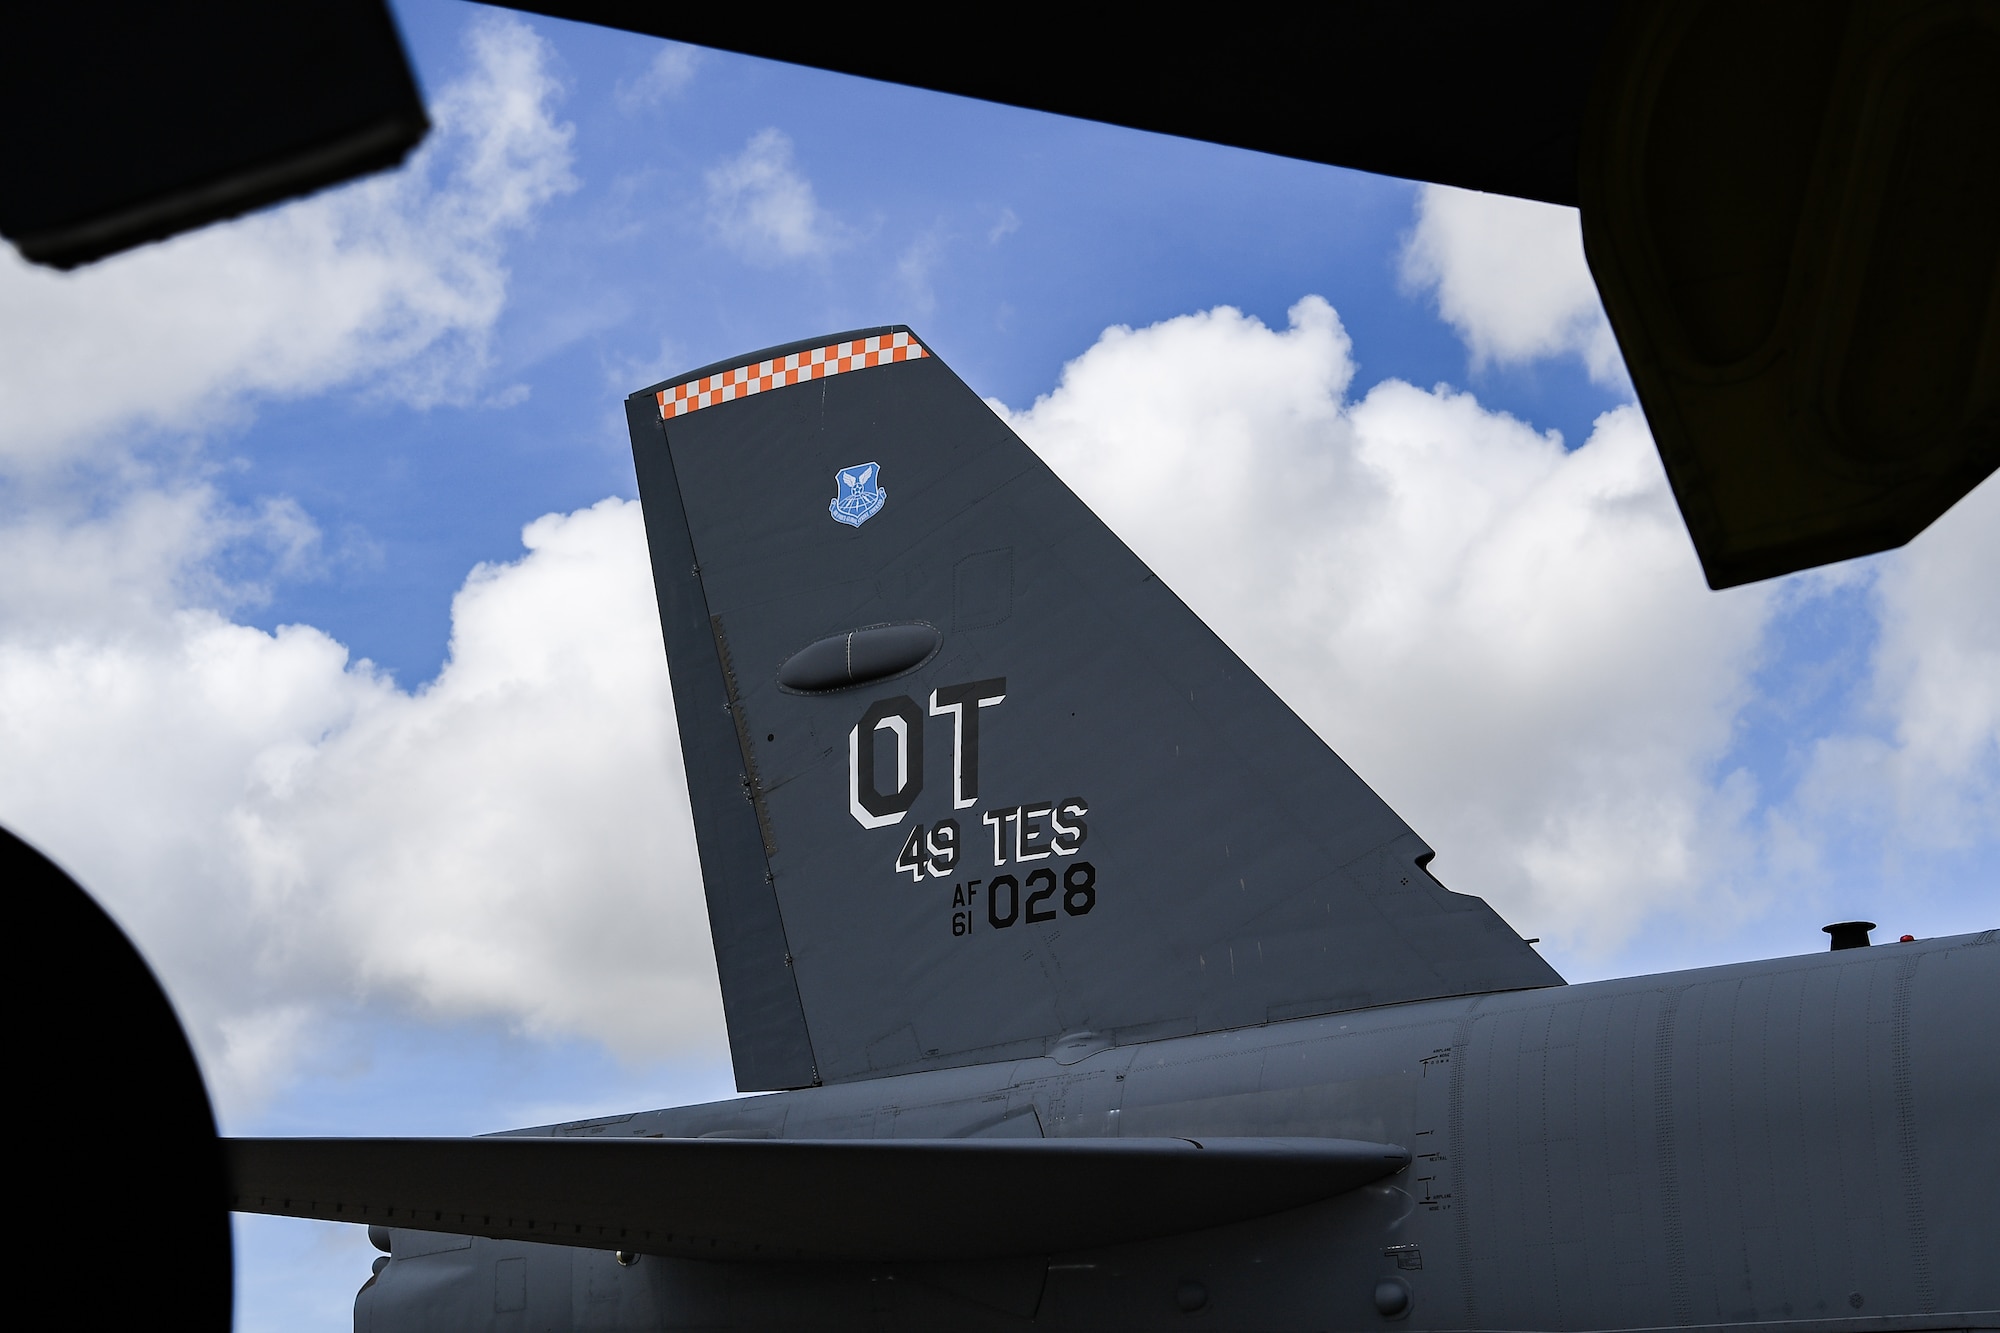 An Operational Test B-52H Stratofortress from the 49th Test and Evaluation Squadron sits on the flight line at Barksdale Air Force Base, Louisiana, June. 29, 2021. The men and women of the 49th TES "Wolfpack" are part of the 53rd Wing. They are charged with executing MAJCOM OT, suitability, and tactics development to equip the warfighter for the future fight. (U.S. Air Force photo by Senior Airman Tristan Biese)